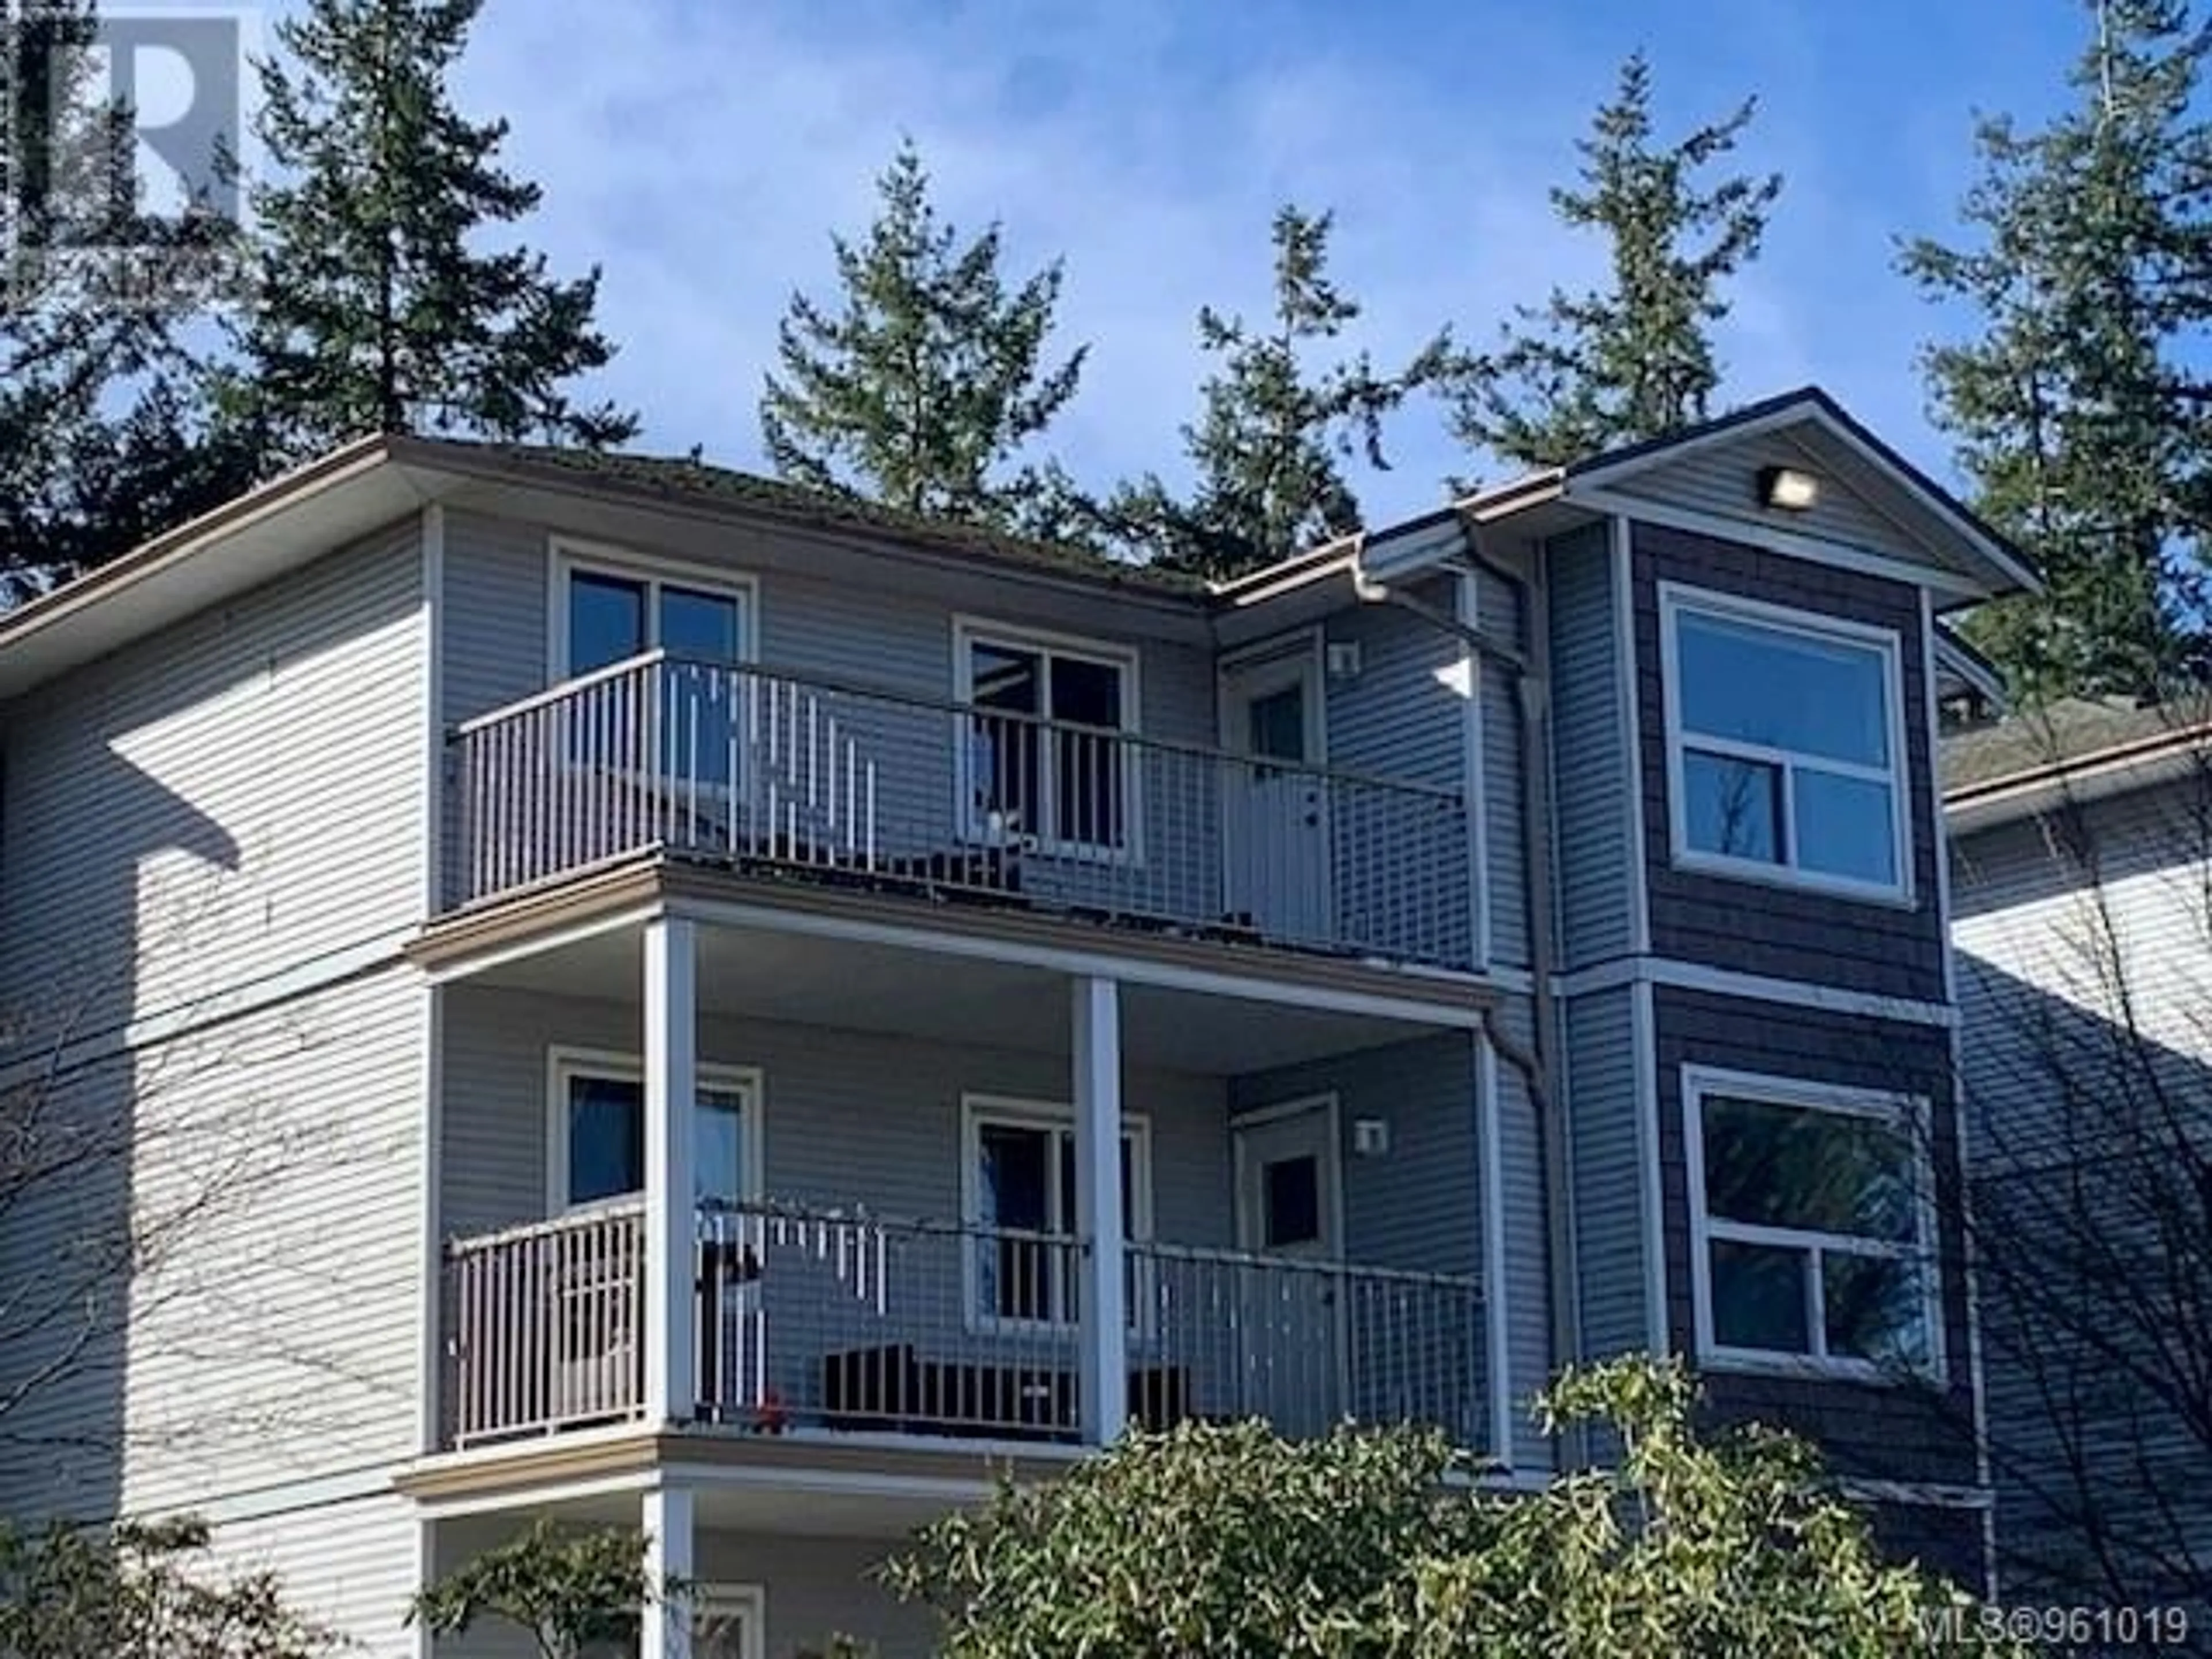 A pic from exterior of the house or condo for 301 262 Birch St, Campbell River British Columbia V9W2S3